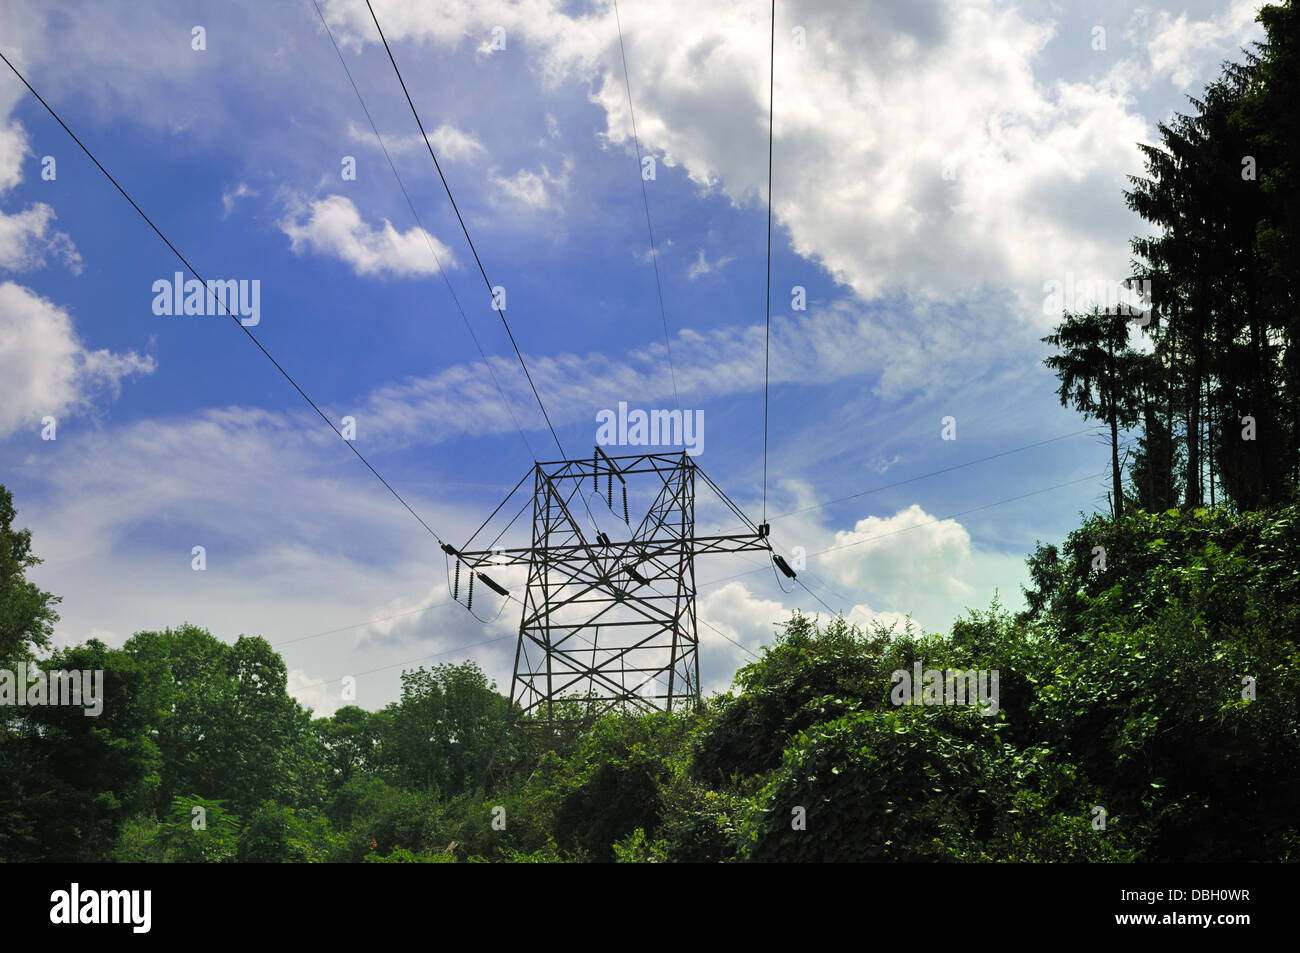 Electric wires and tower in a rural setting Stock Photo